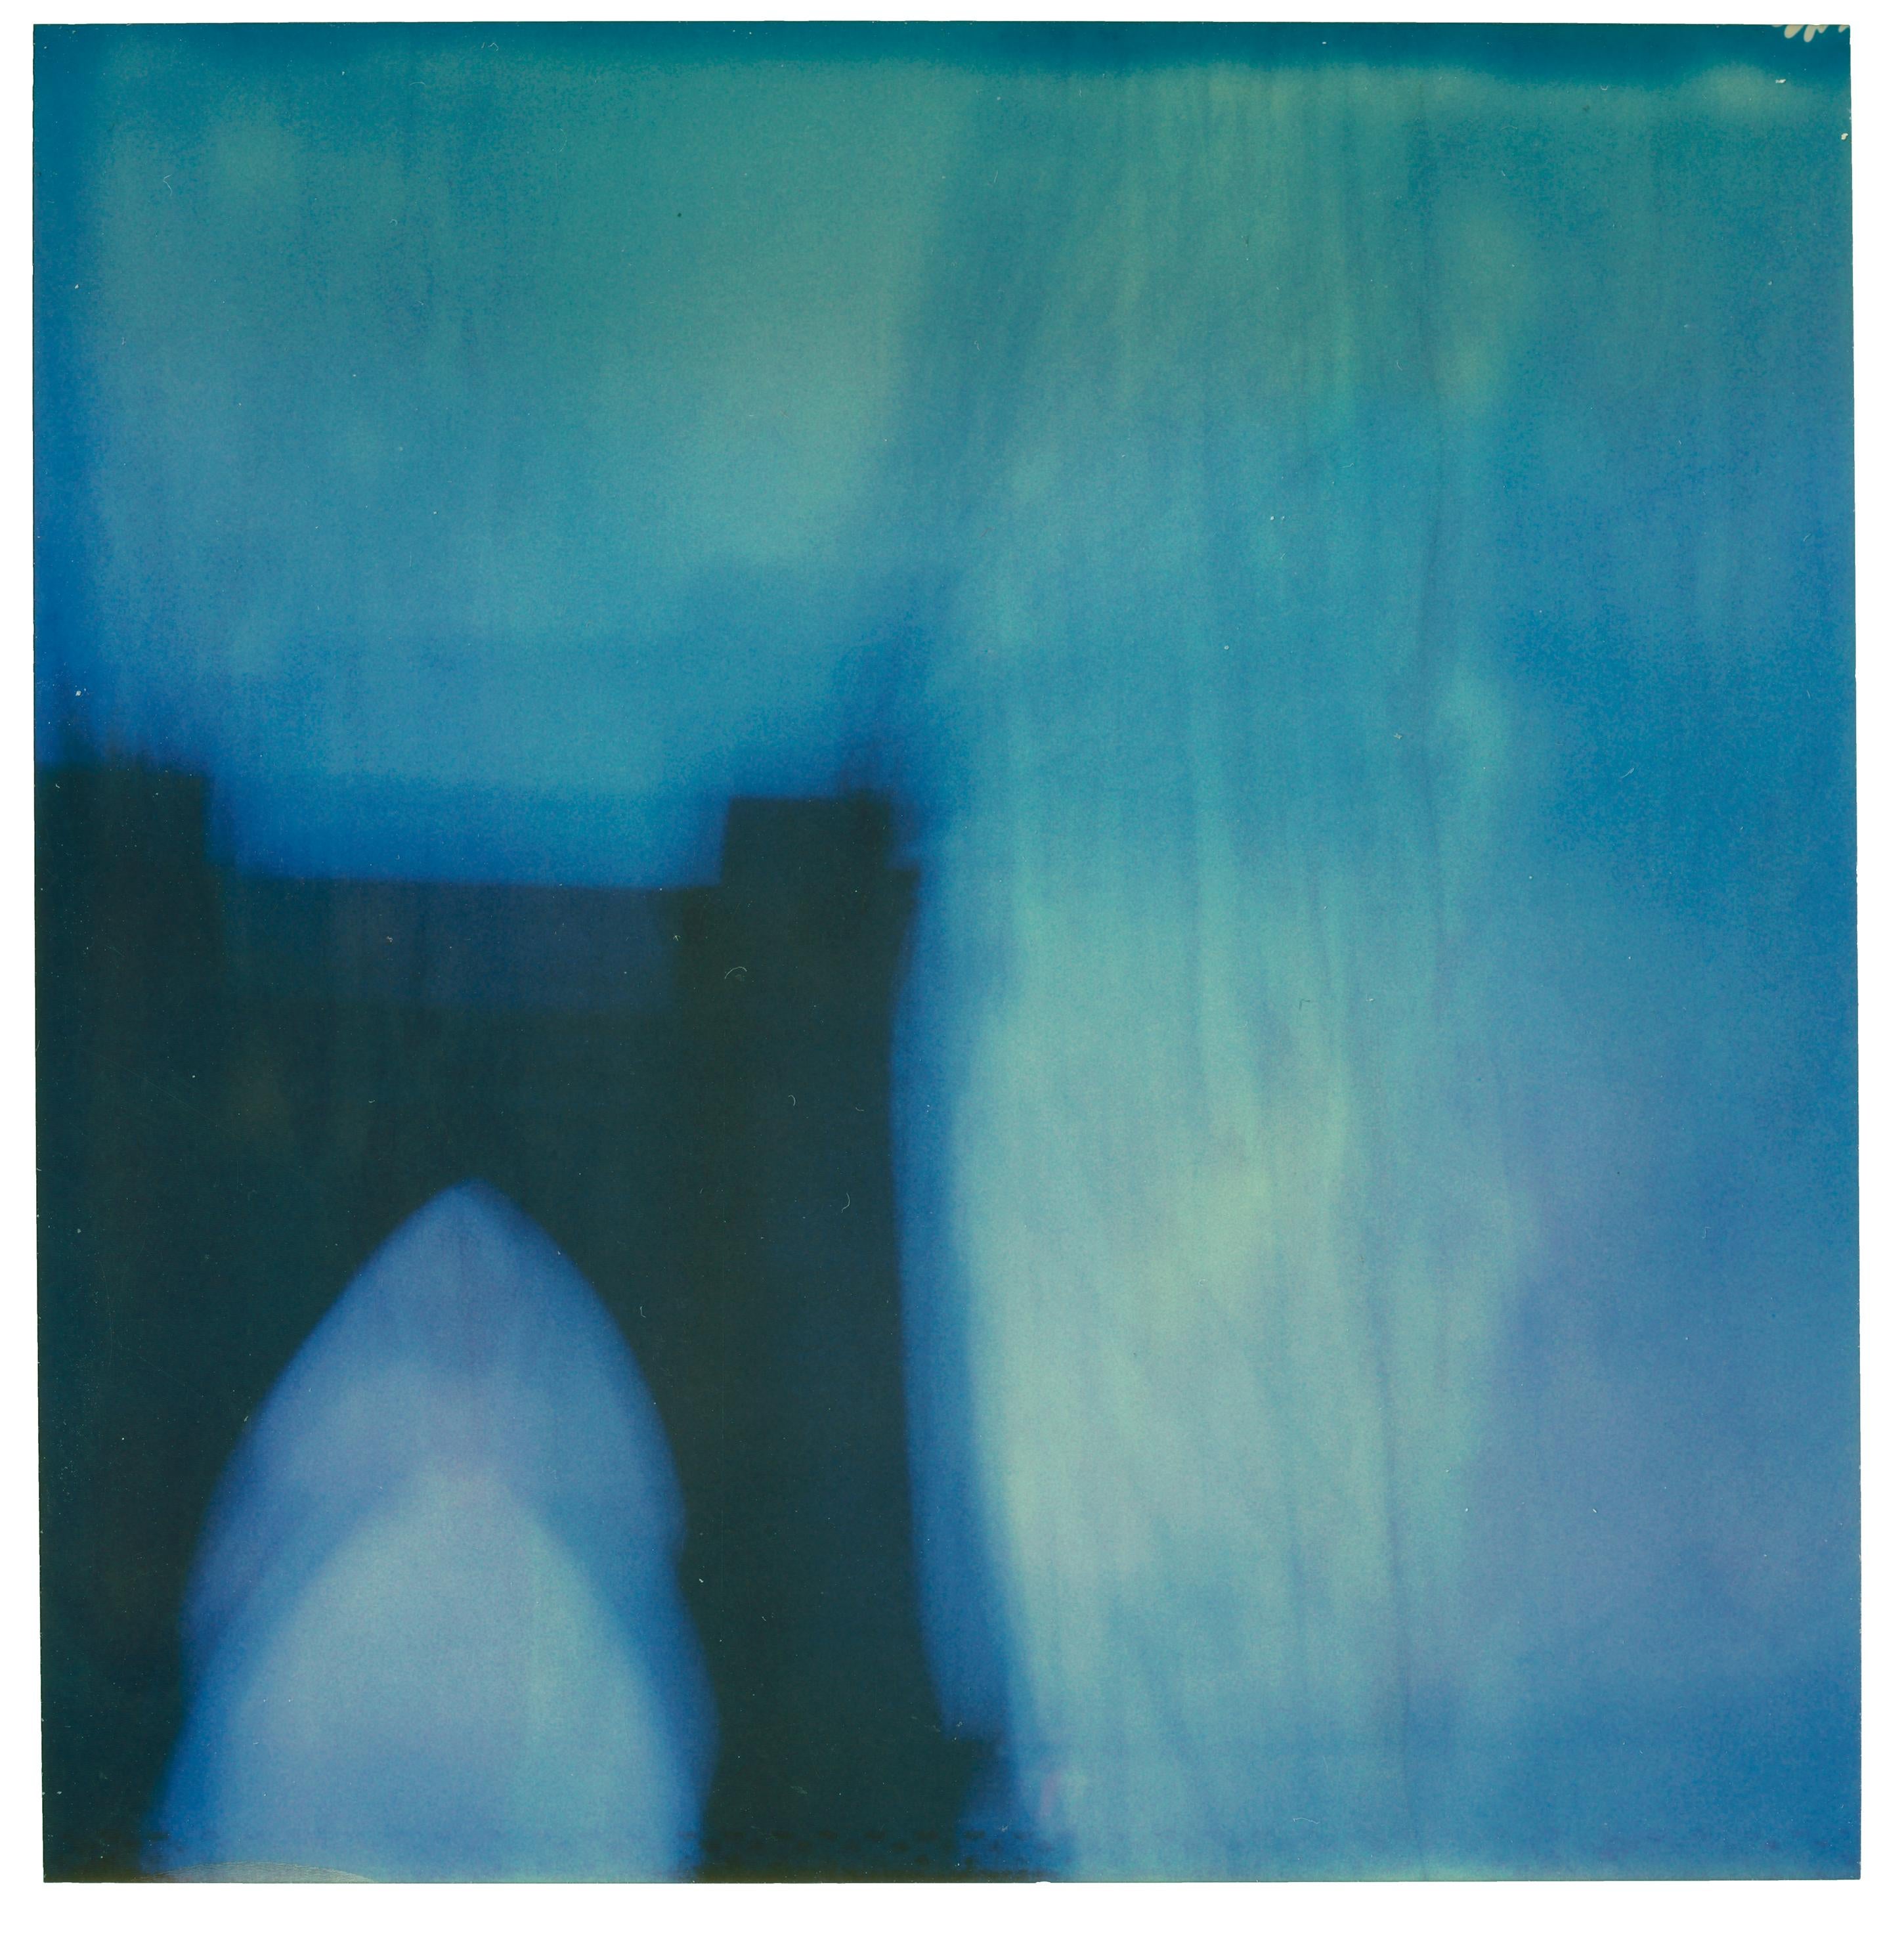 Stefanie Schneider Abstract Photograph - Finished Bridge (Stay) - Contemporary, Abstract, New York, USA, Polaroid, Blue